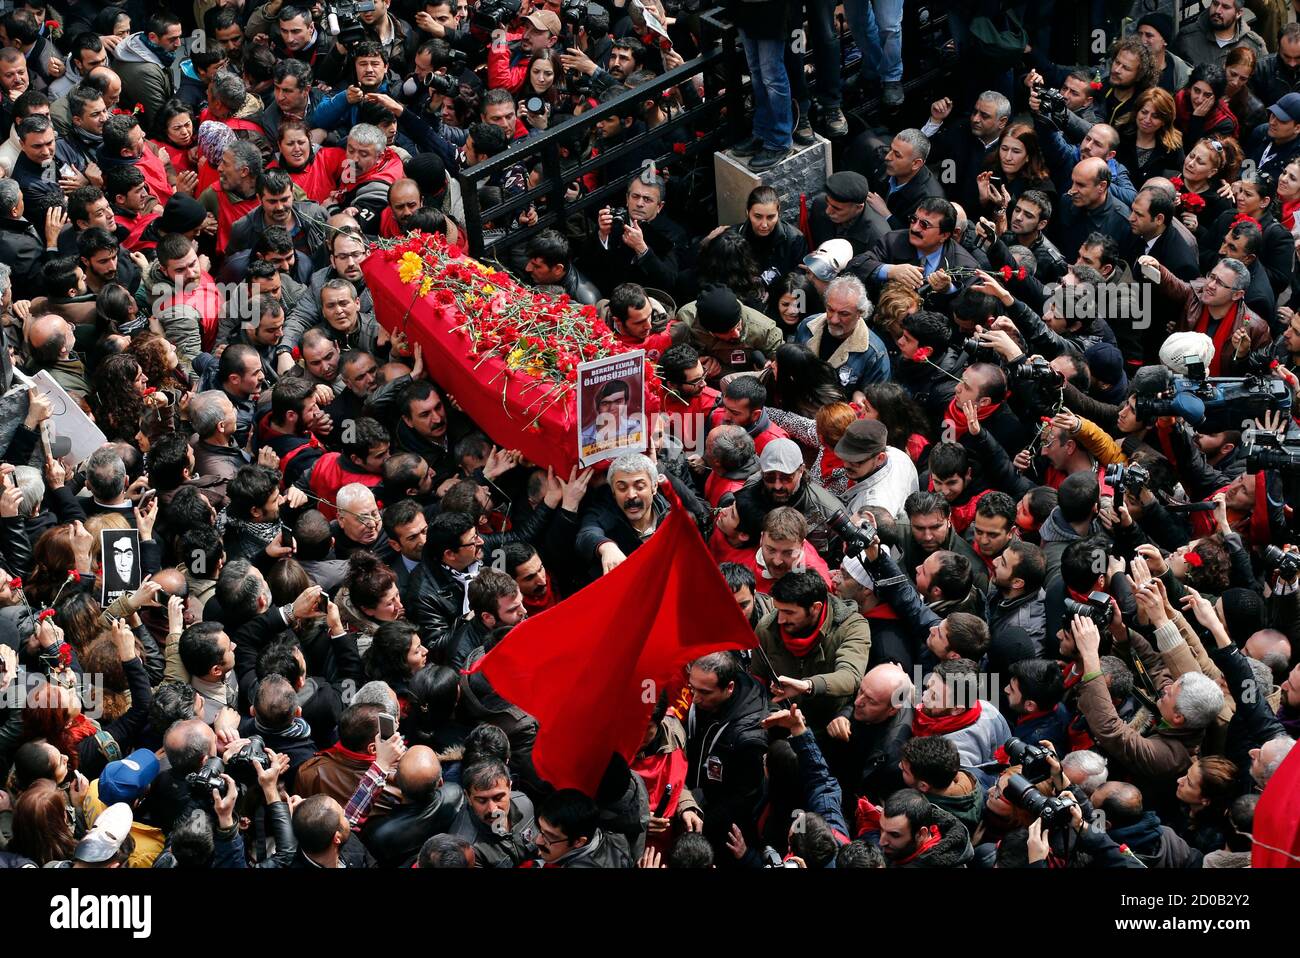 Mourners carry the coffin of Berkin Elvan during funeral ceremony in Okmeydani cemevi, an Alevi place of worship, in Istanbul March 12, 2014. Several thousand mourners gathered in central Istanbul on Wednesday for the funeral of Elvan, a 15-year-old boy wounded during anti-government demonstrations last summer whose death on Tuesday triggered protests across Turkey.  REUTERS/Osman Orsal (TURKEY  - Tags: POLITICS CIVIL UNREST) Stock Photo